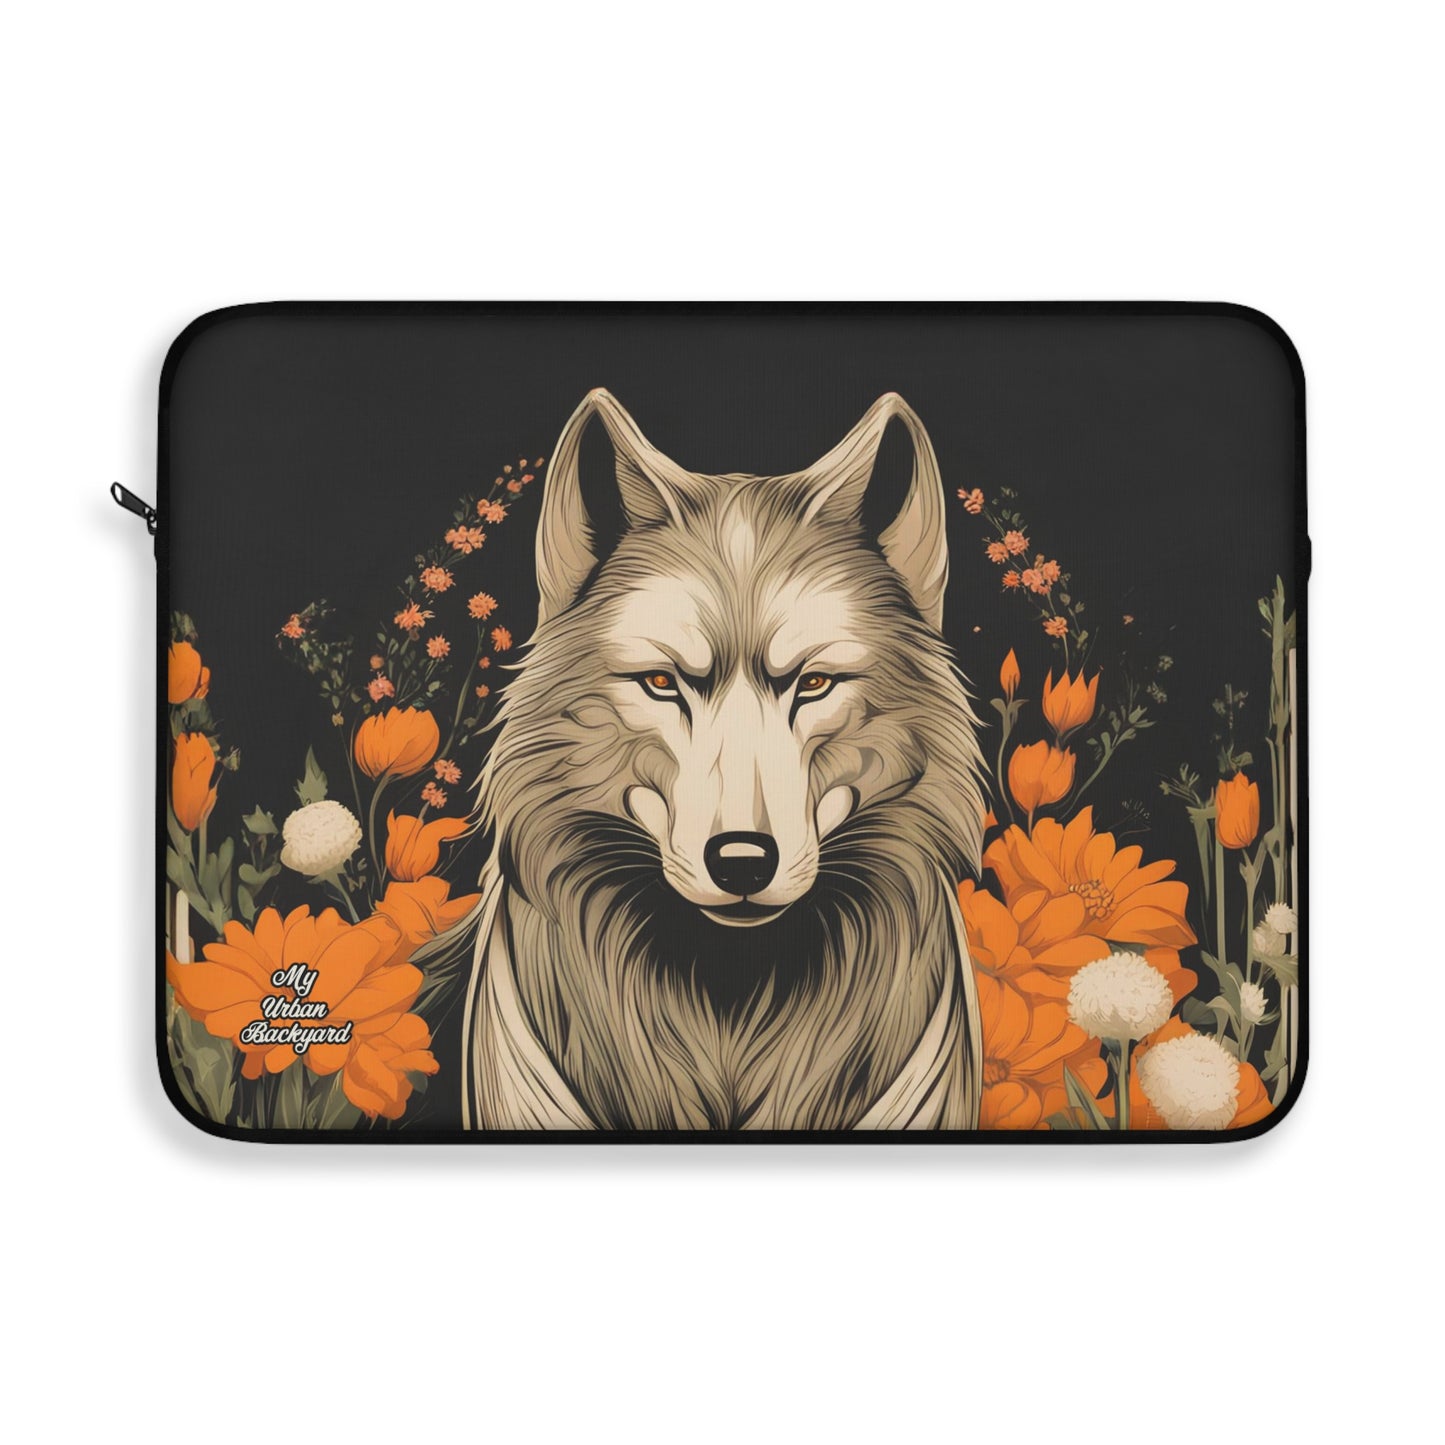 Wolf with Flowers, Laptop Carrying Case, Top Loading Sleeve for School or Work